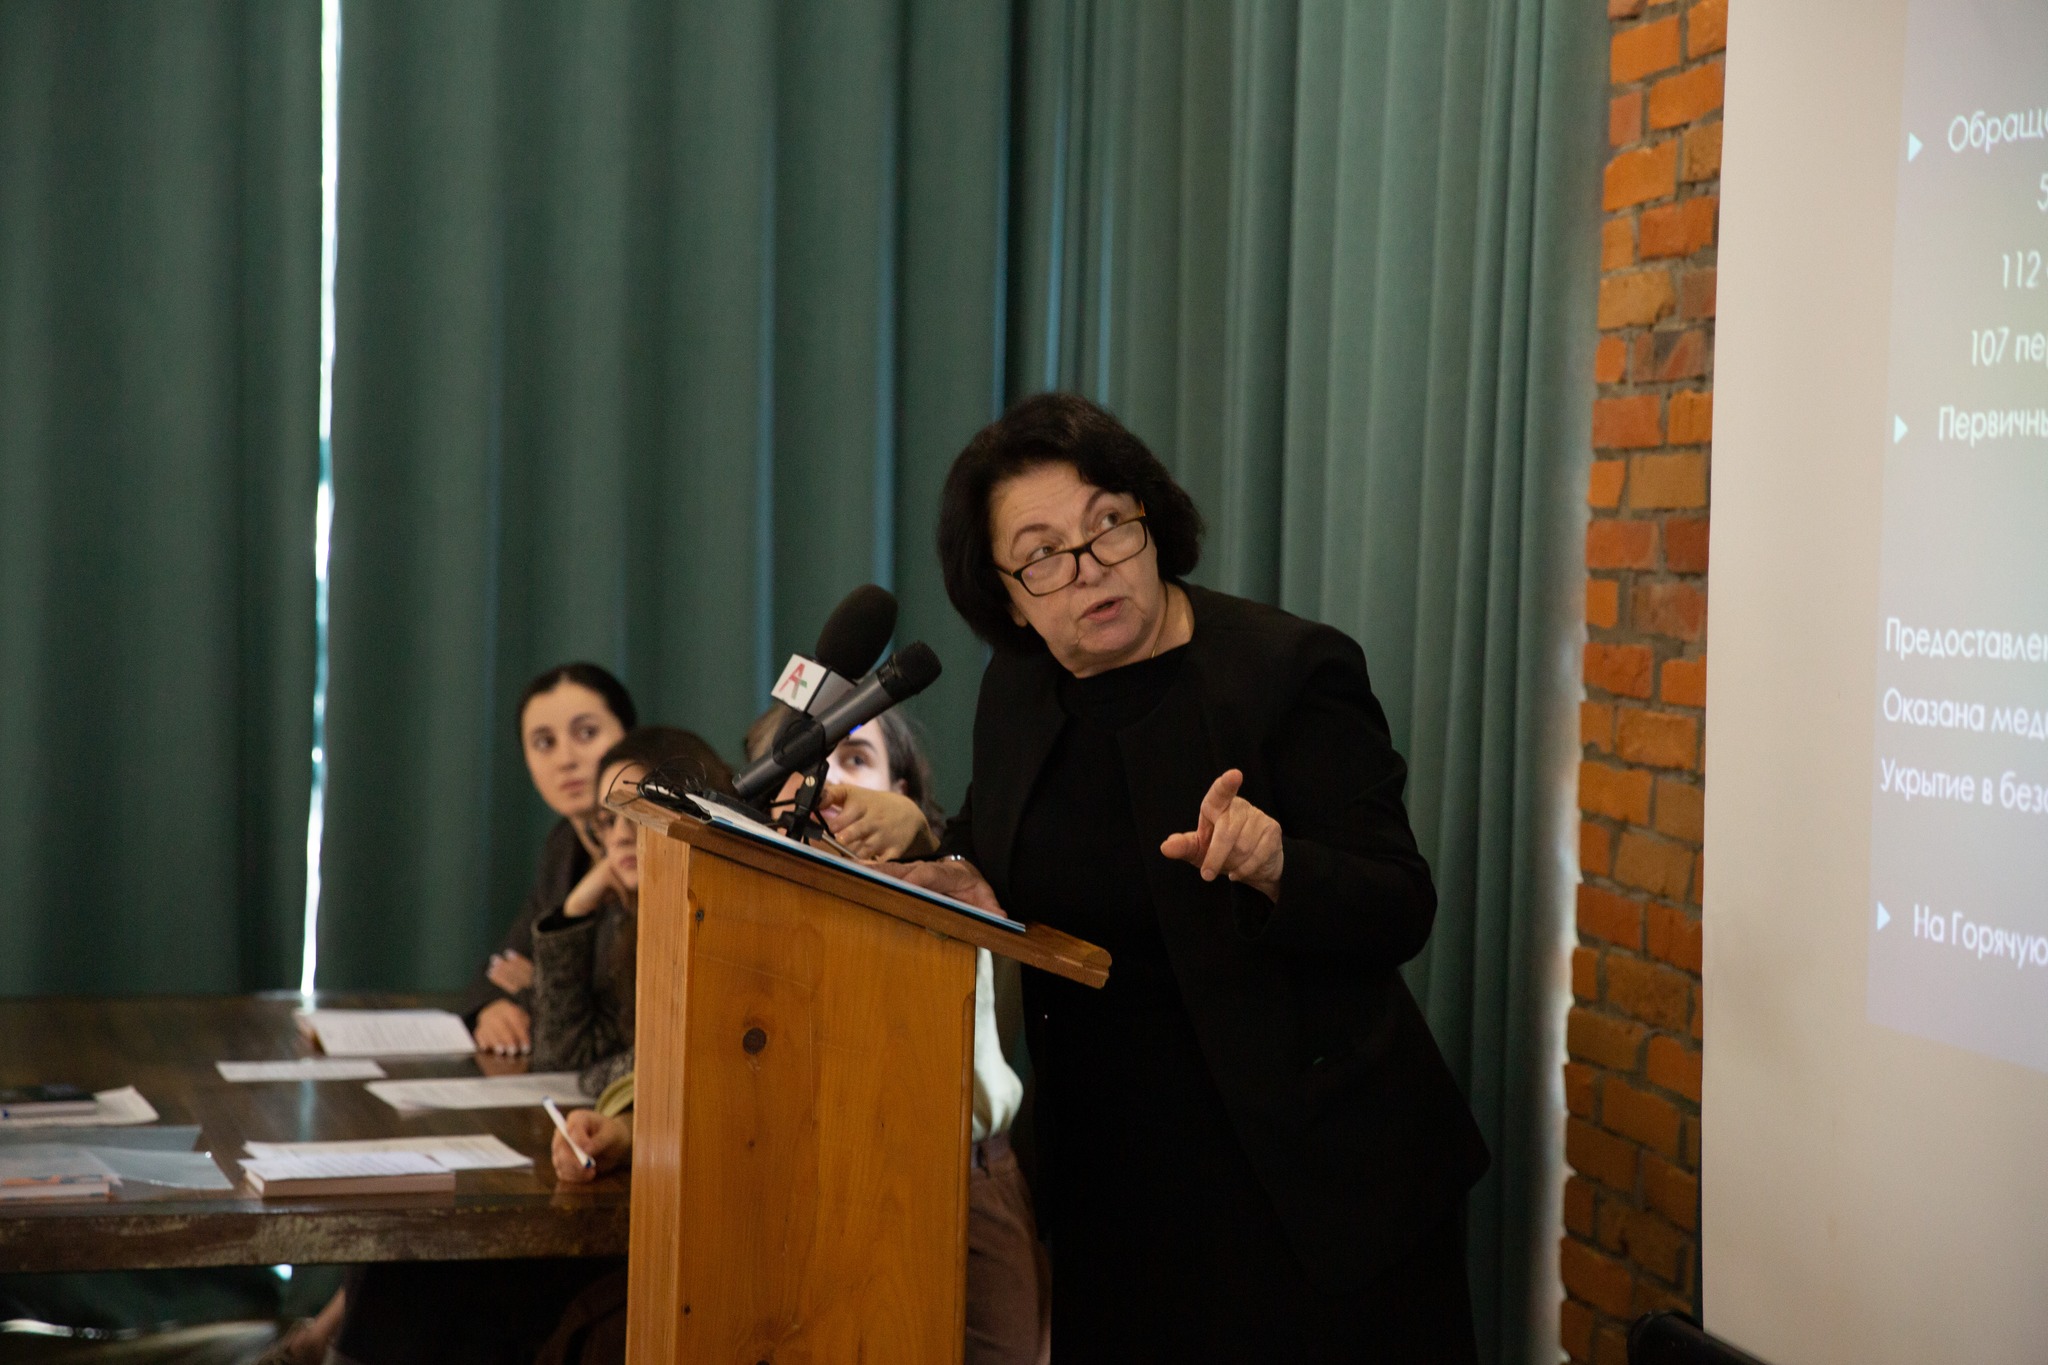 Women's Rights in Abkhazia Discussed at Women's Forum